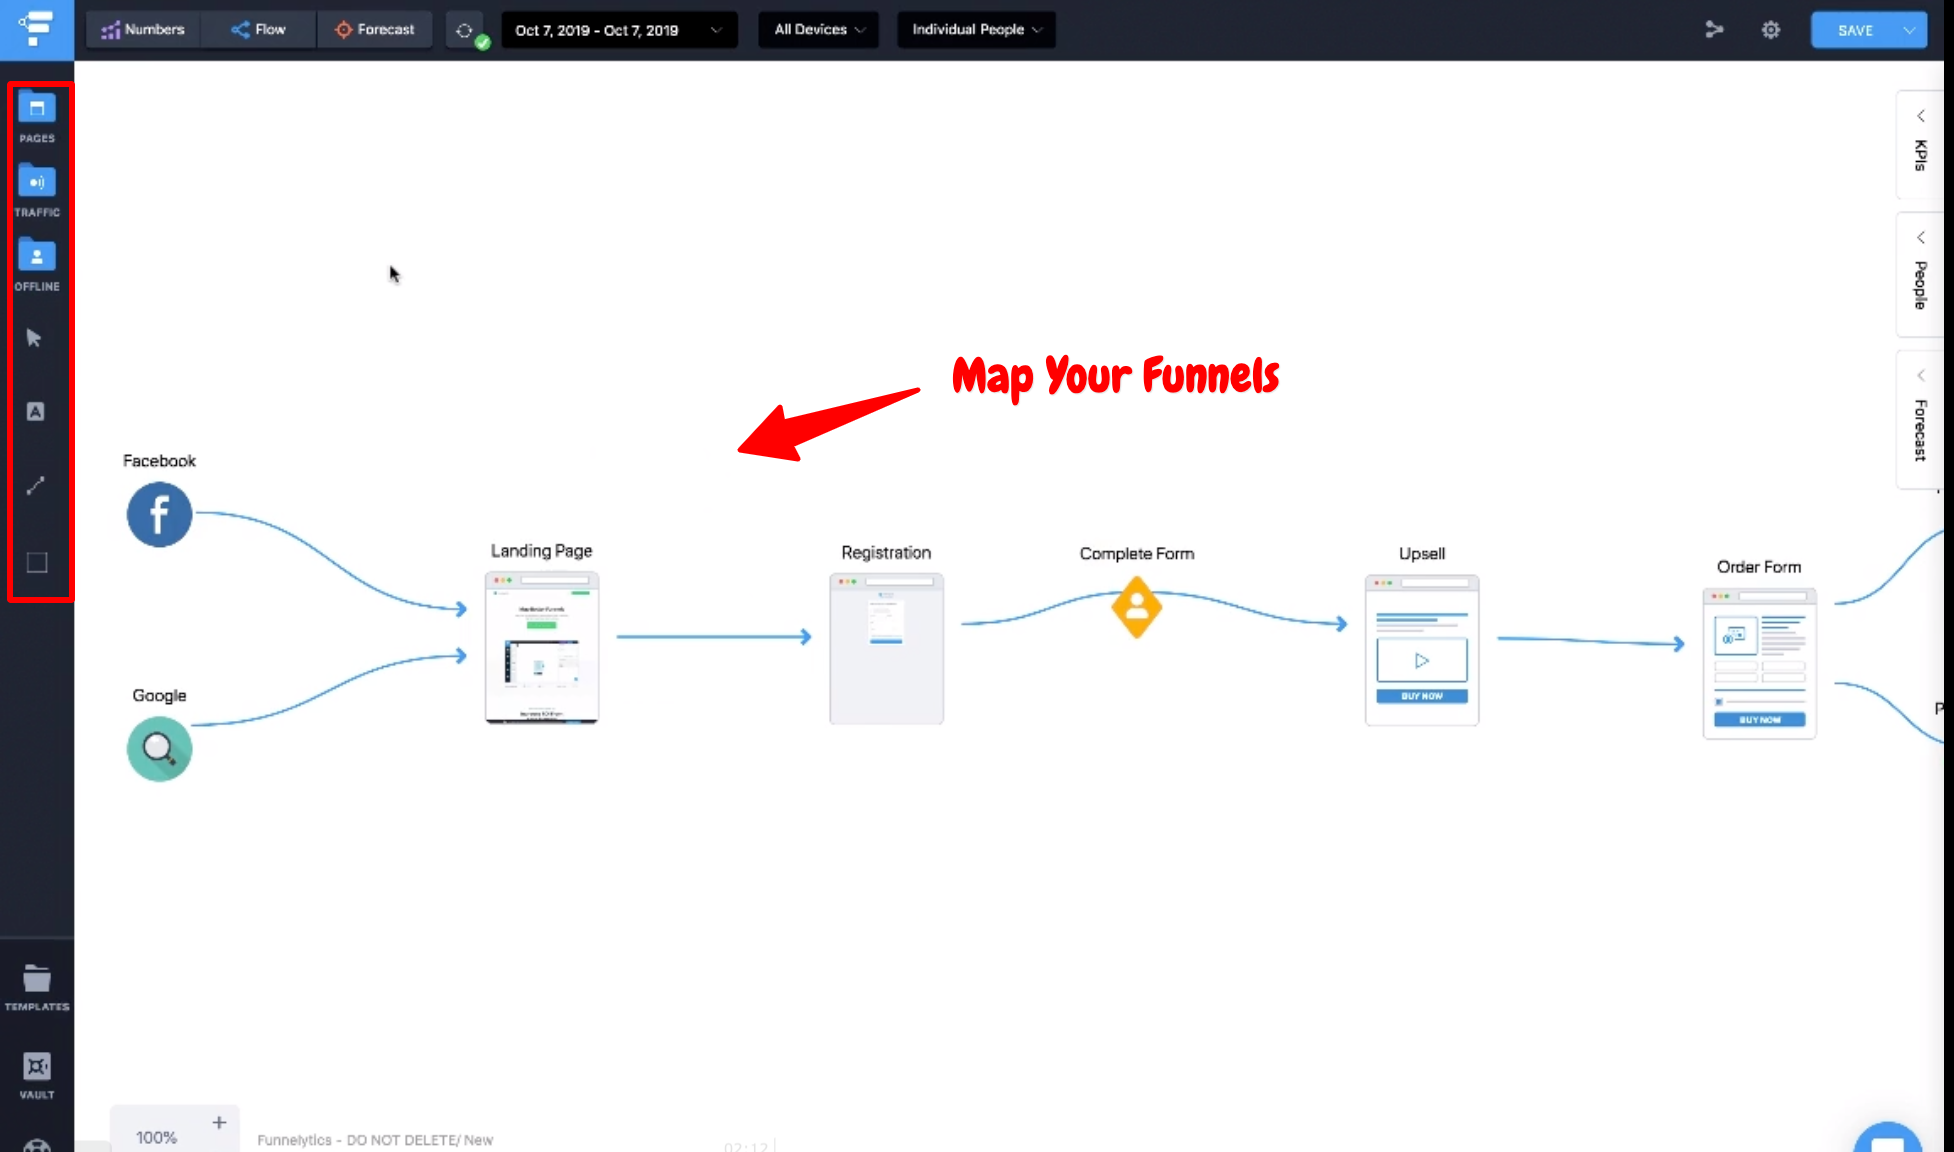 Funnelytics Pro - Map Your Funnels